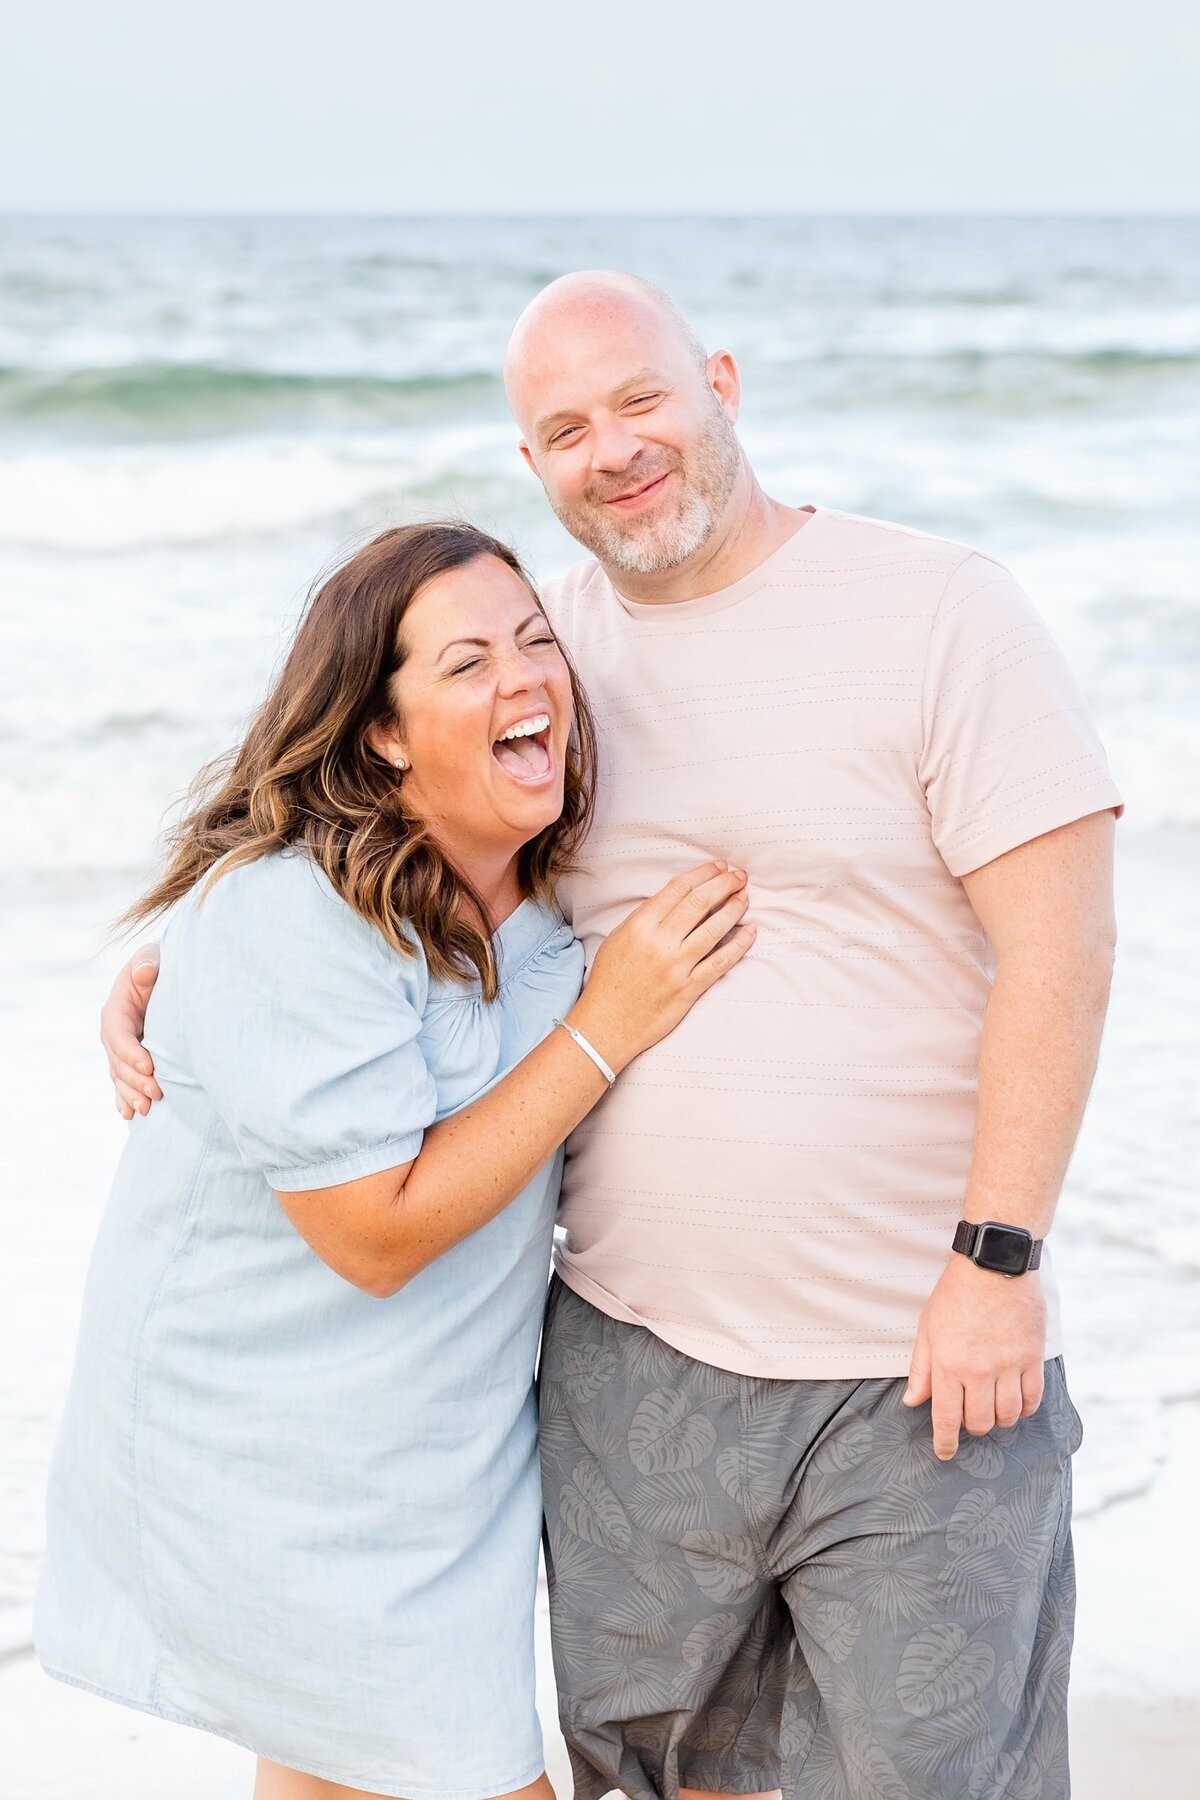 Wife laughing at husband at the beach